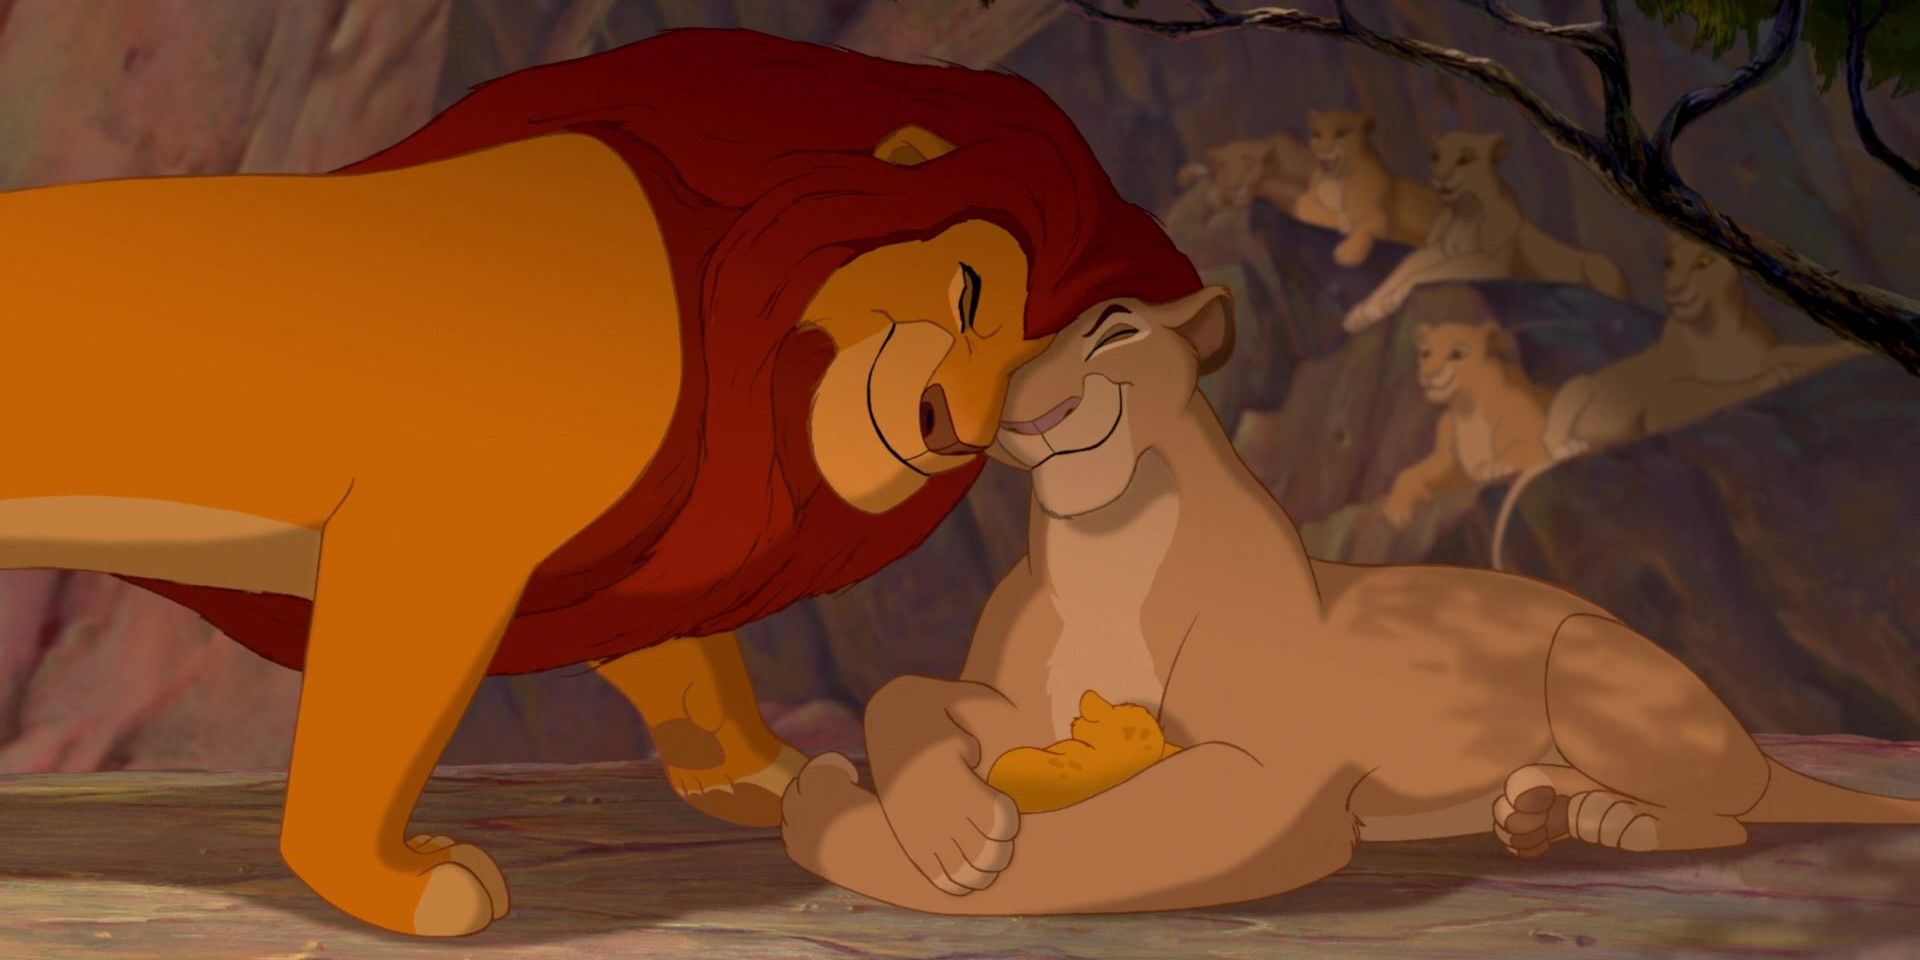 Mufasa embraces his wife as she holds onto Simba in The Lion King